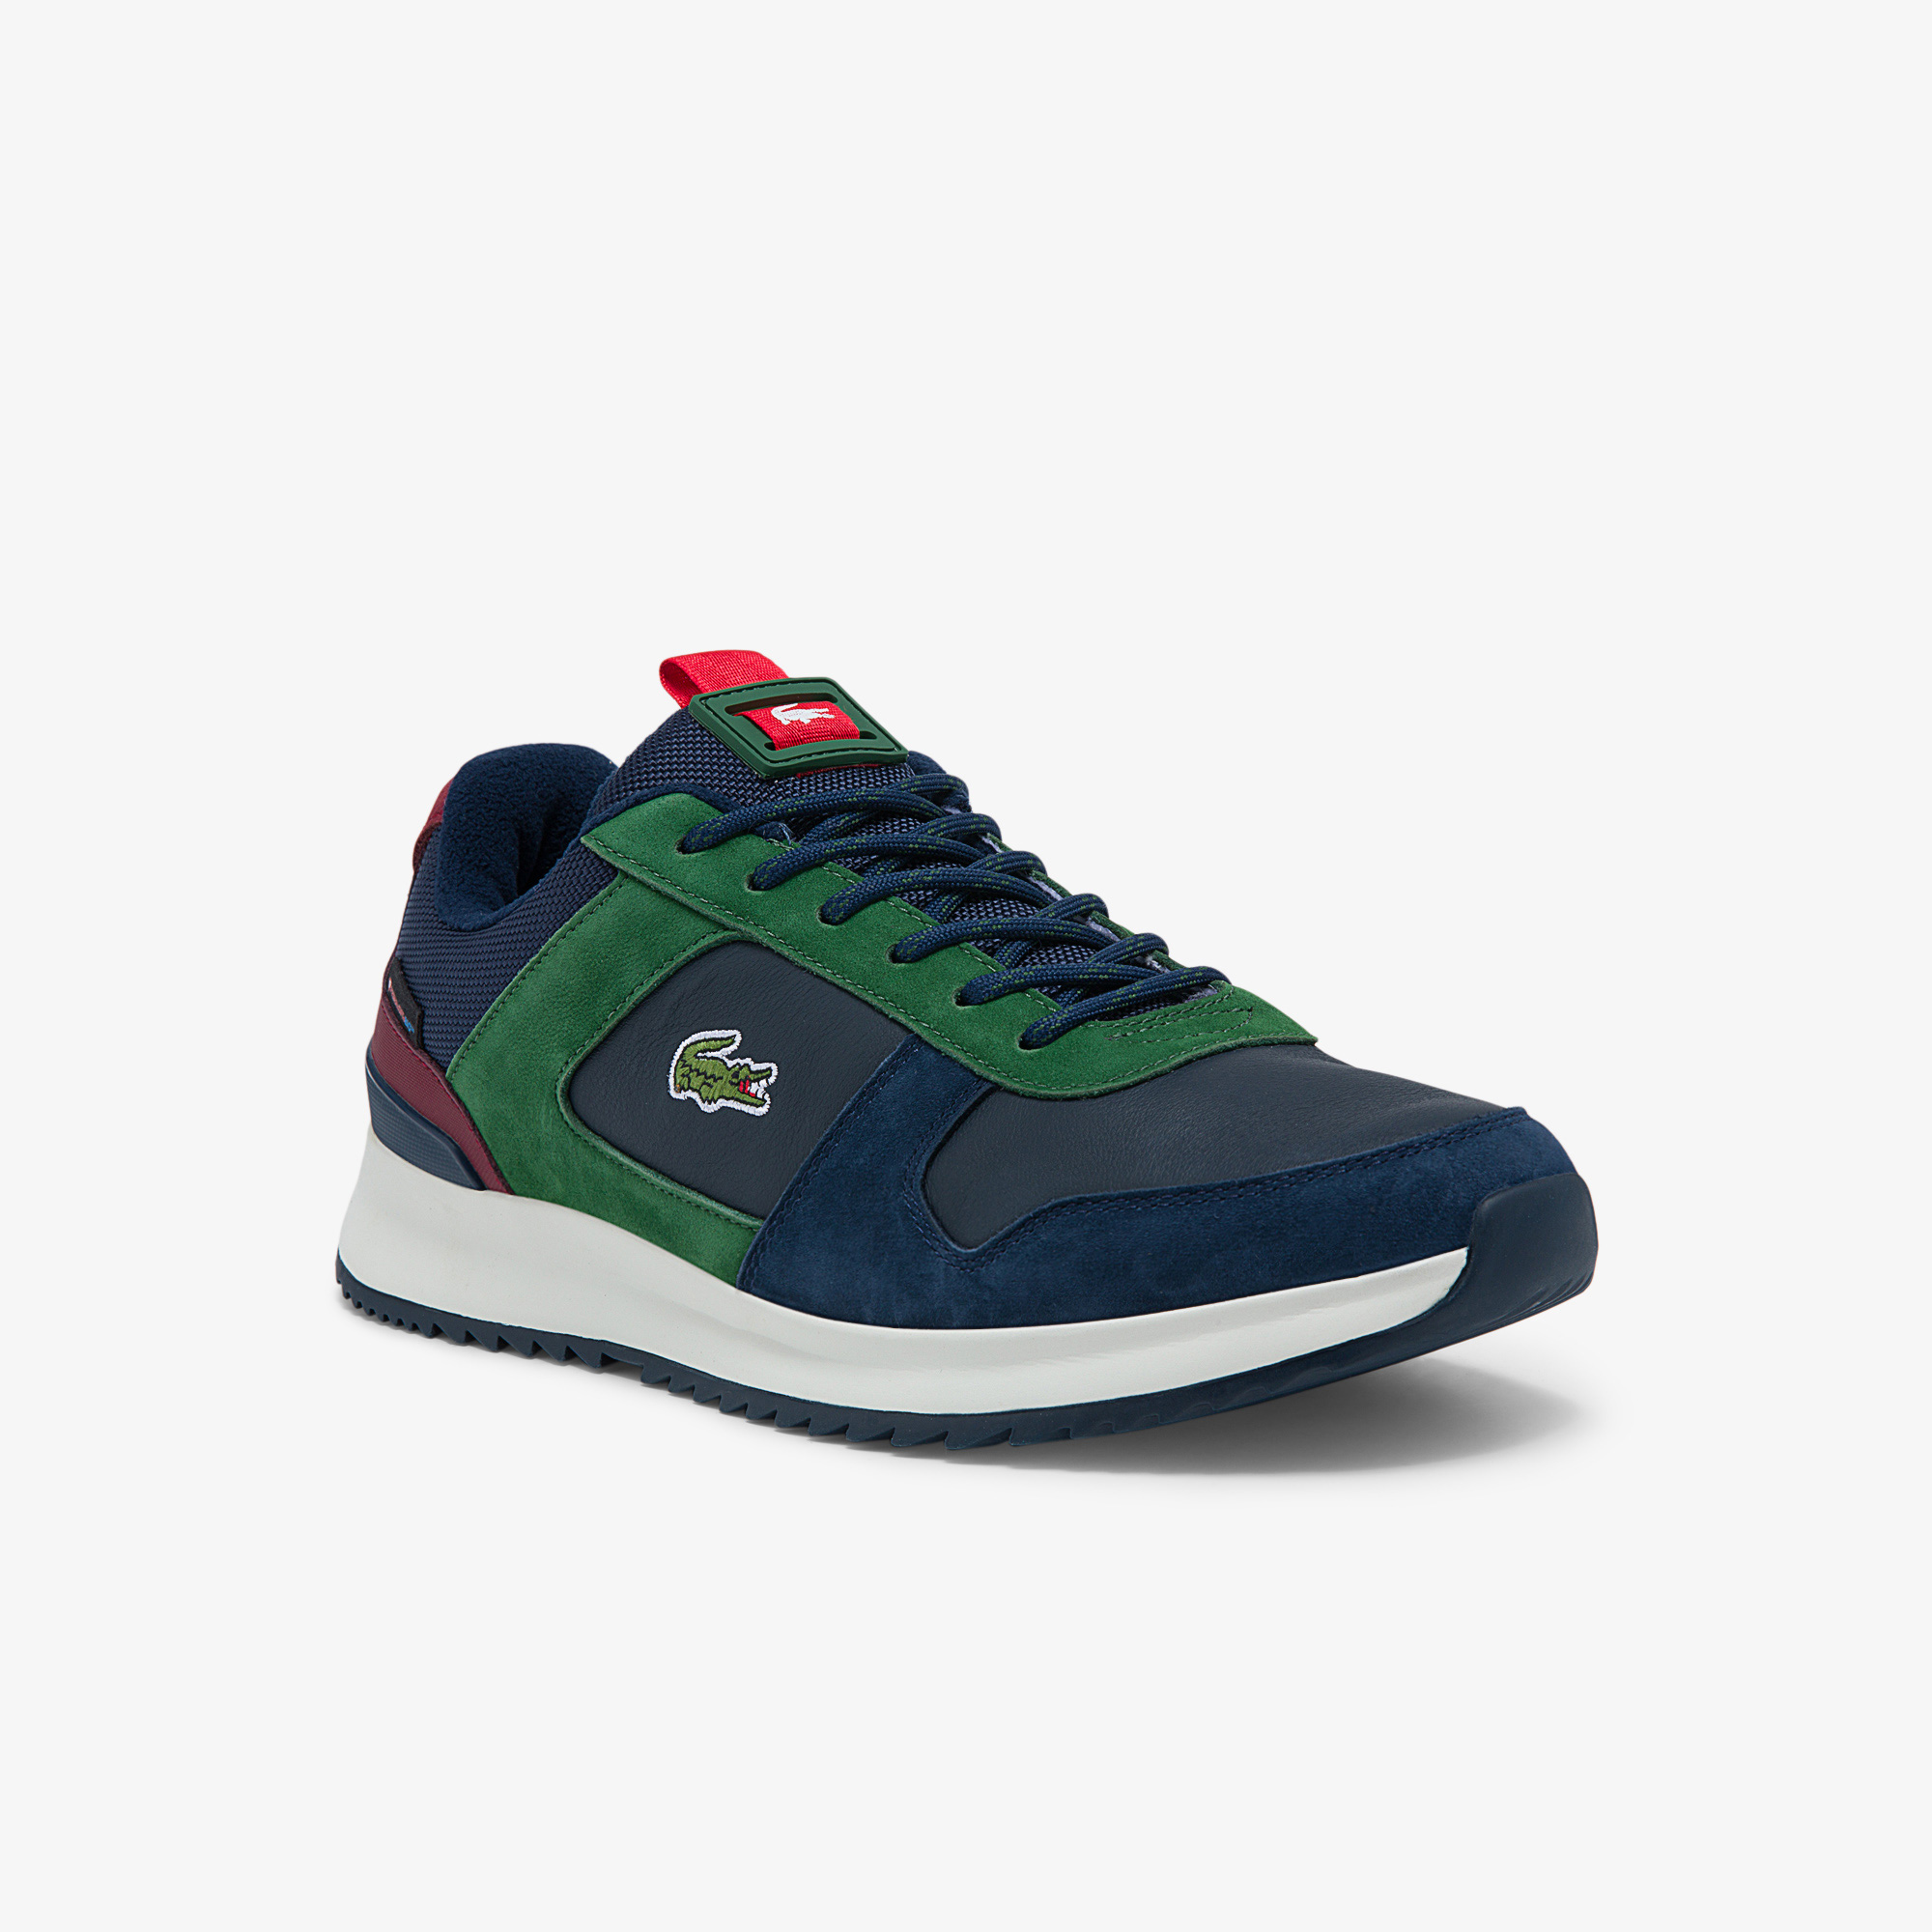 Ayarlamak tencere melodram  Lacoste Men's Joggeur 2.0 Leather and Textile Sneakers 742SMA0070 | Lacoste